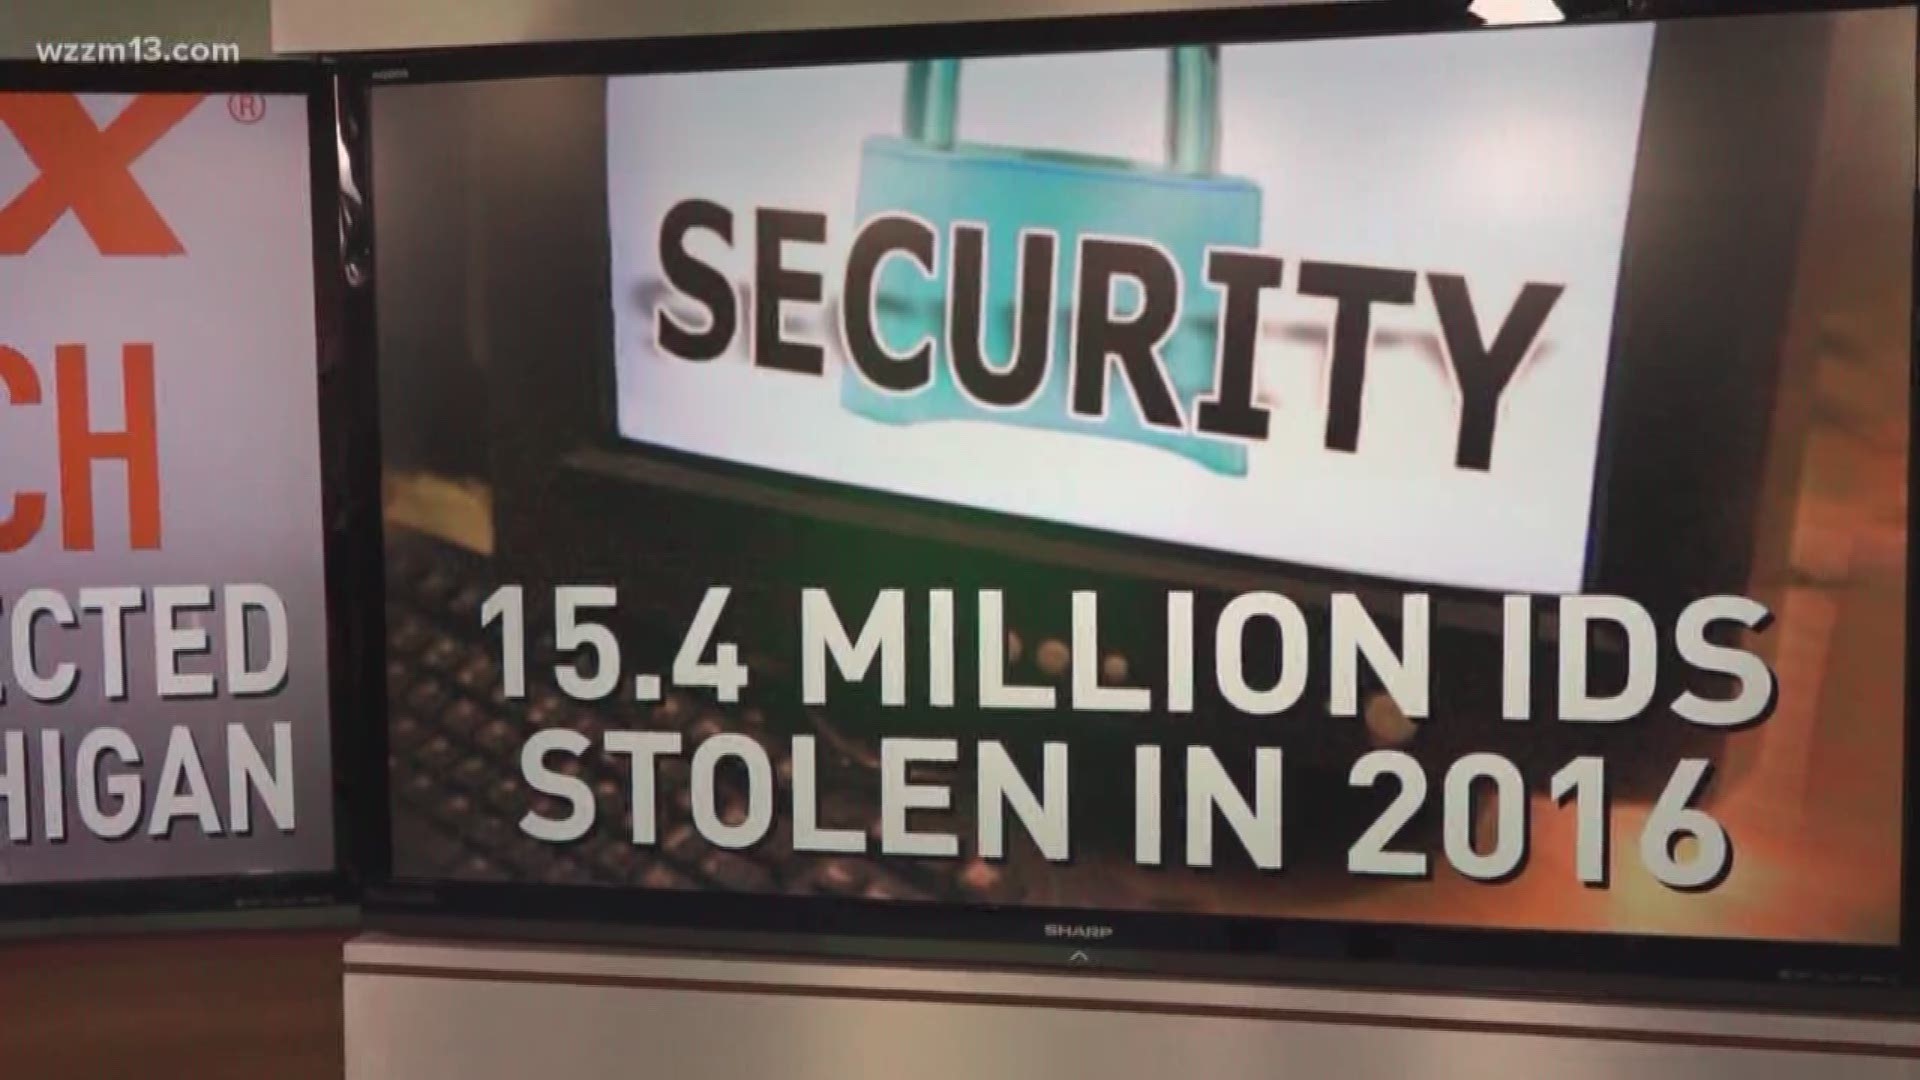 An estimated 15.4 million people had their identity stolen in 2016.